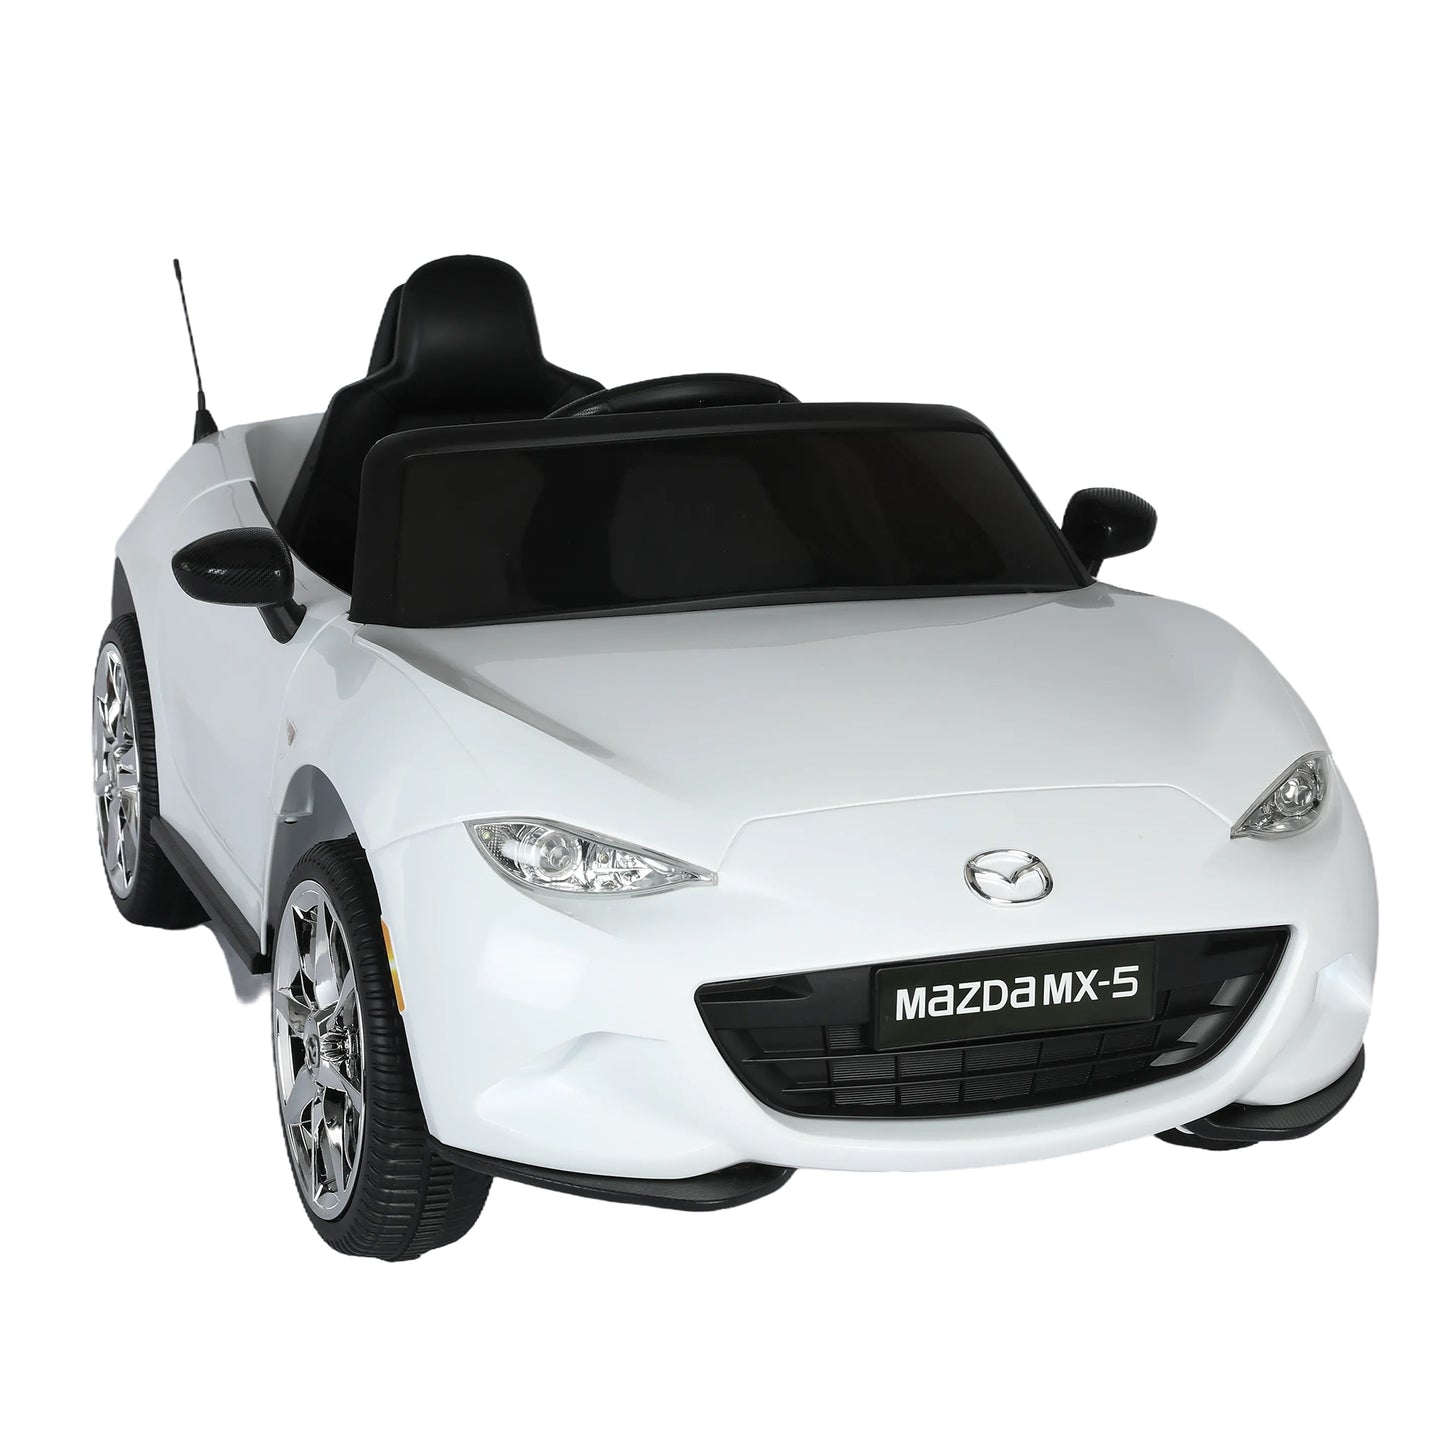 Licensed MAZDA MX-5 RF,12V Kids ride on car 2.4G W/Parents Remote Control,electric car for kids,Three speed adjustable,Power display, USB,MP3 ,Bluetooth,LED light,Two-point safety belt